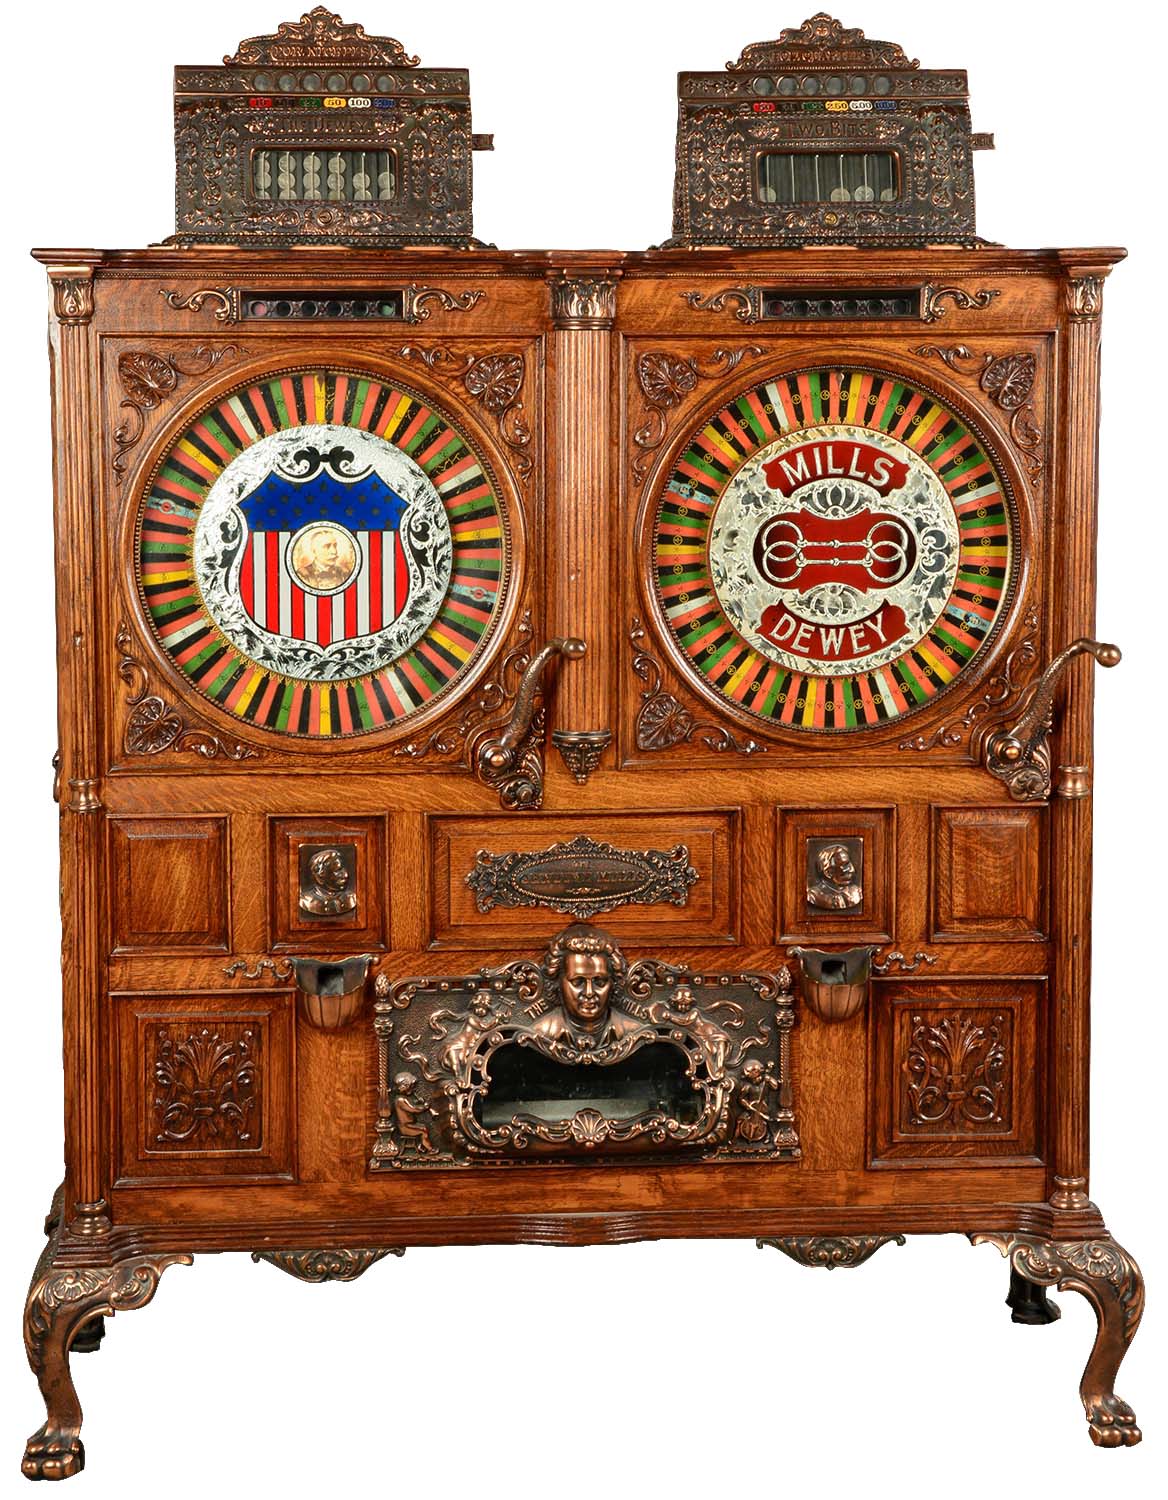 5¢-25¢ Mills Double Dewey Two Bits Slot Machine, estimated at $60,000-90,000.